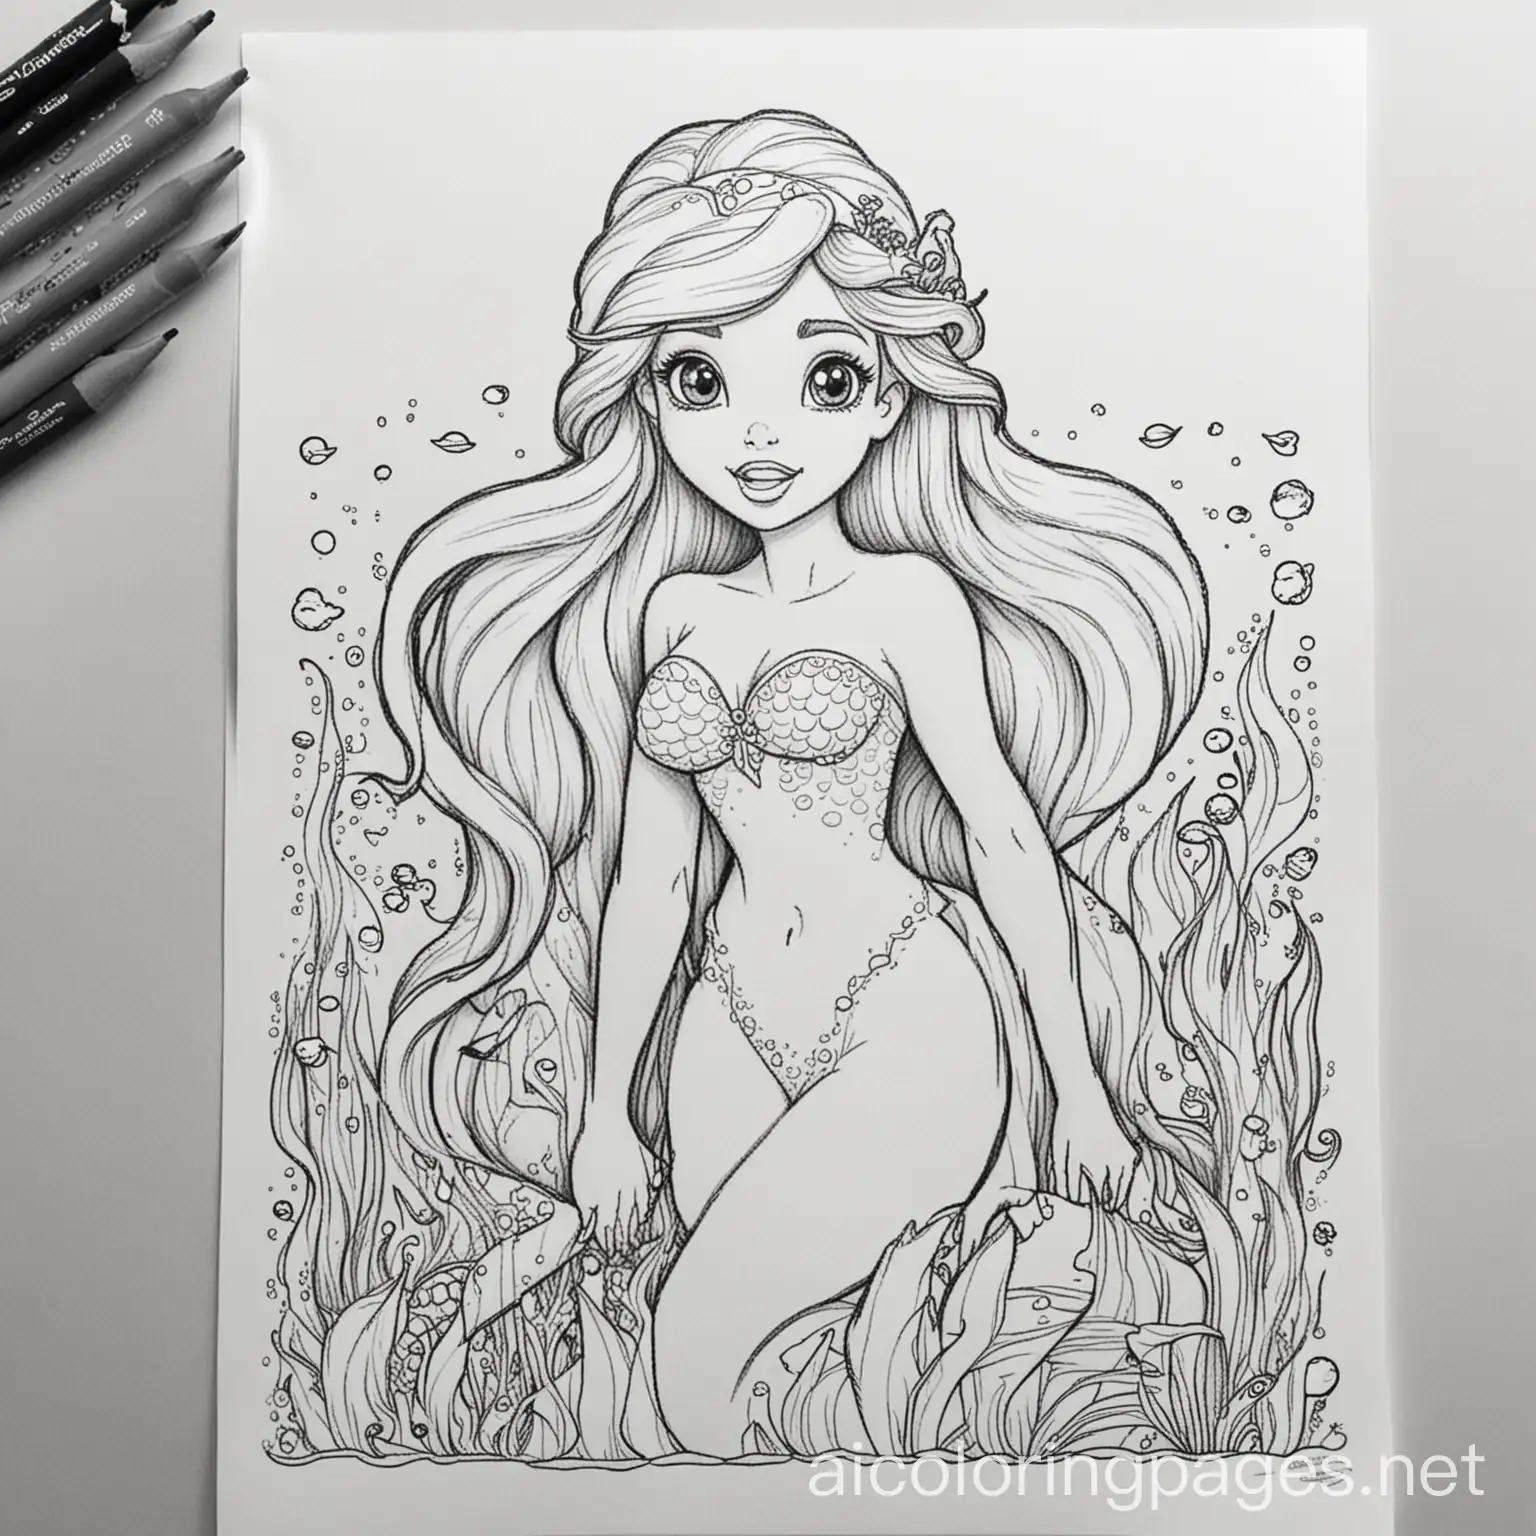 Simple-Black-and-White-Little-Mermaid-Coloring-Page-for-Kids